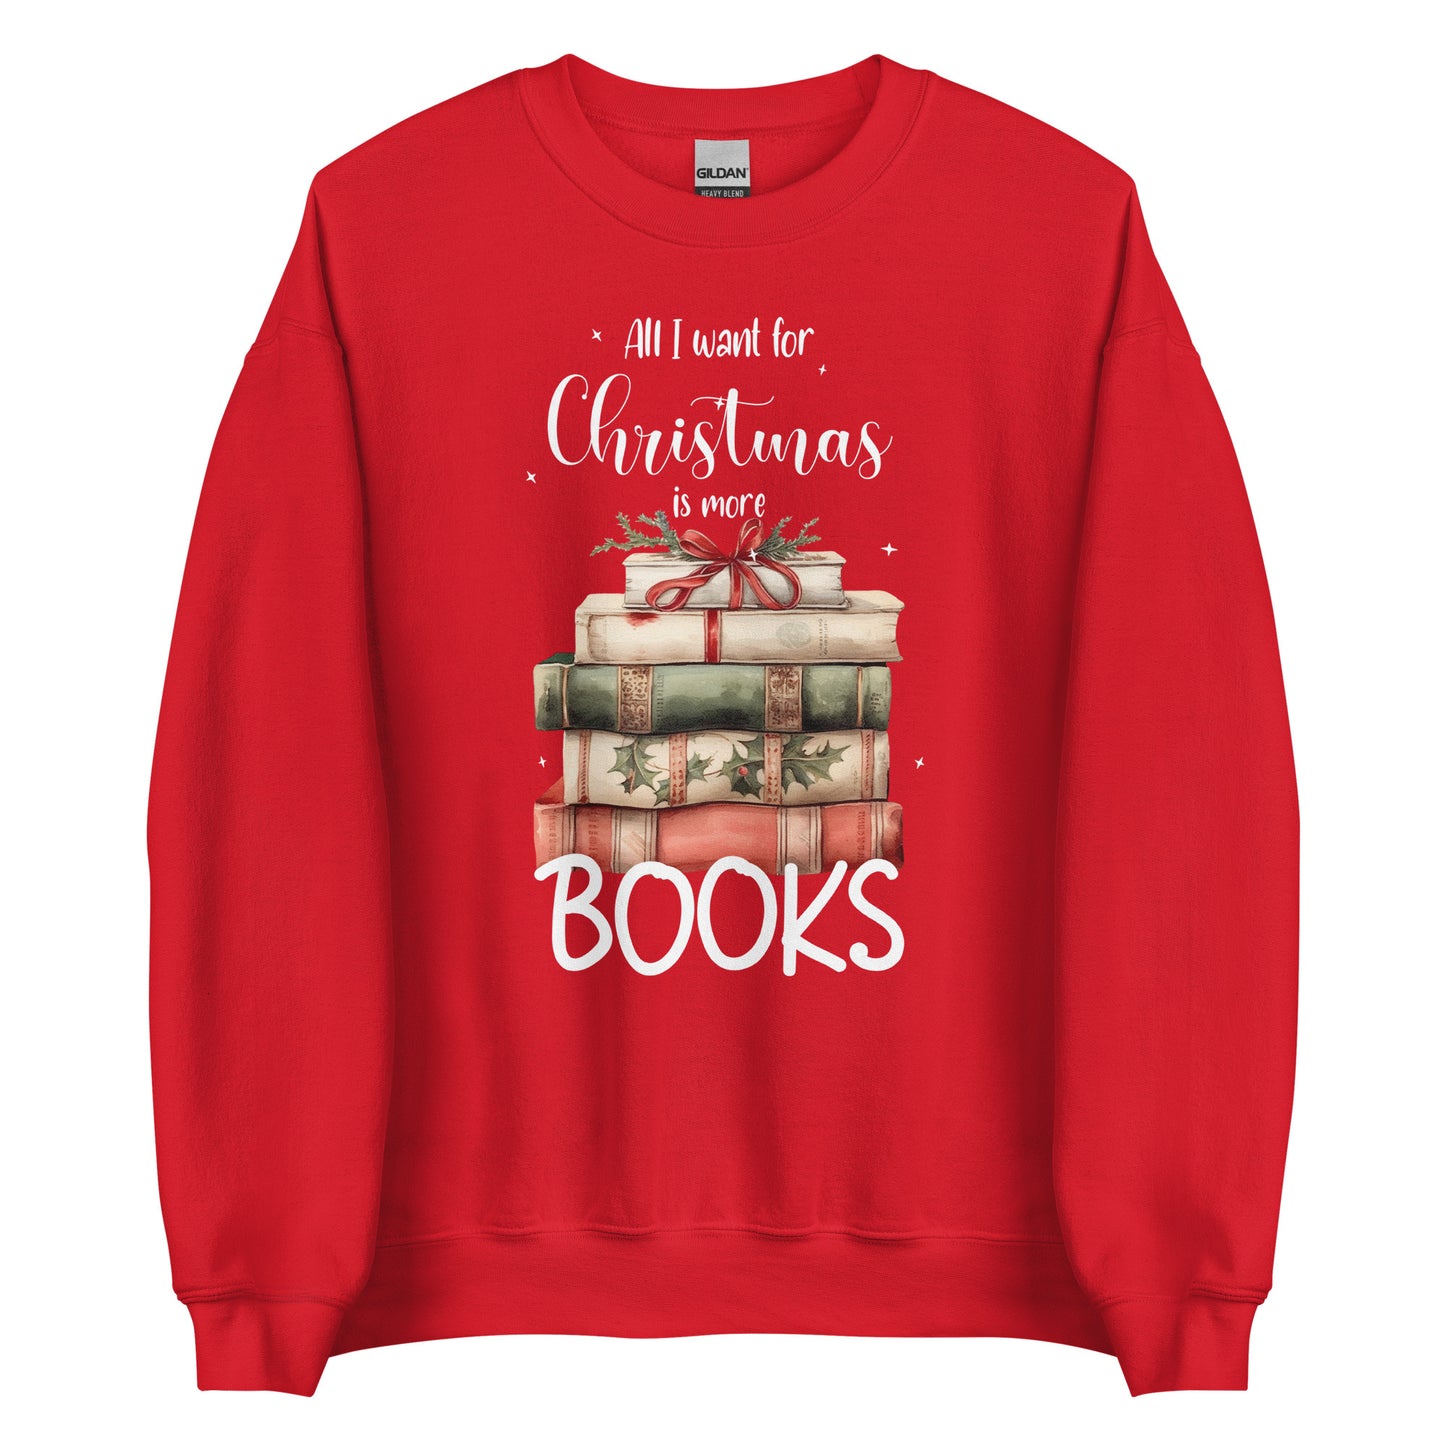 All I Want for Christmas are Books Sweatshirt